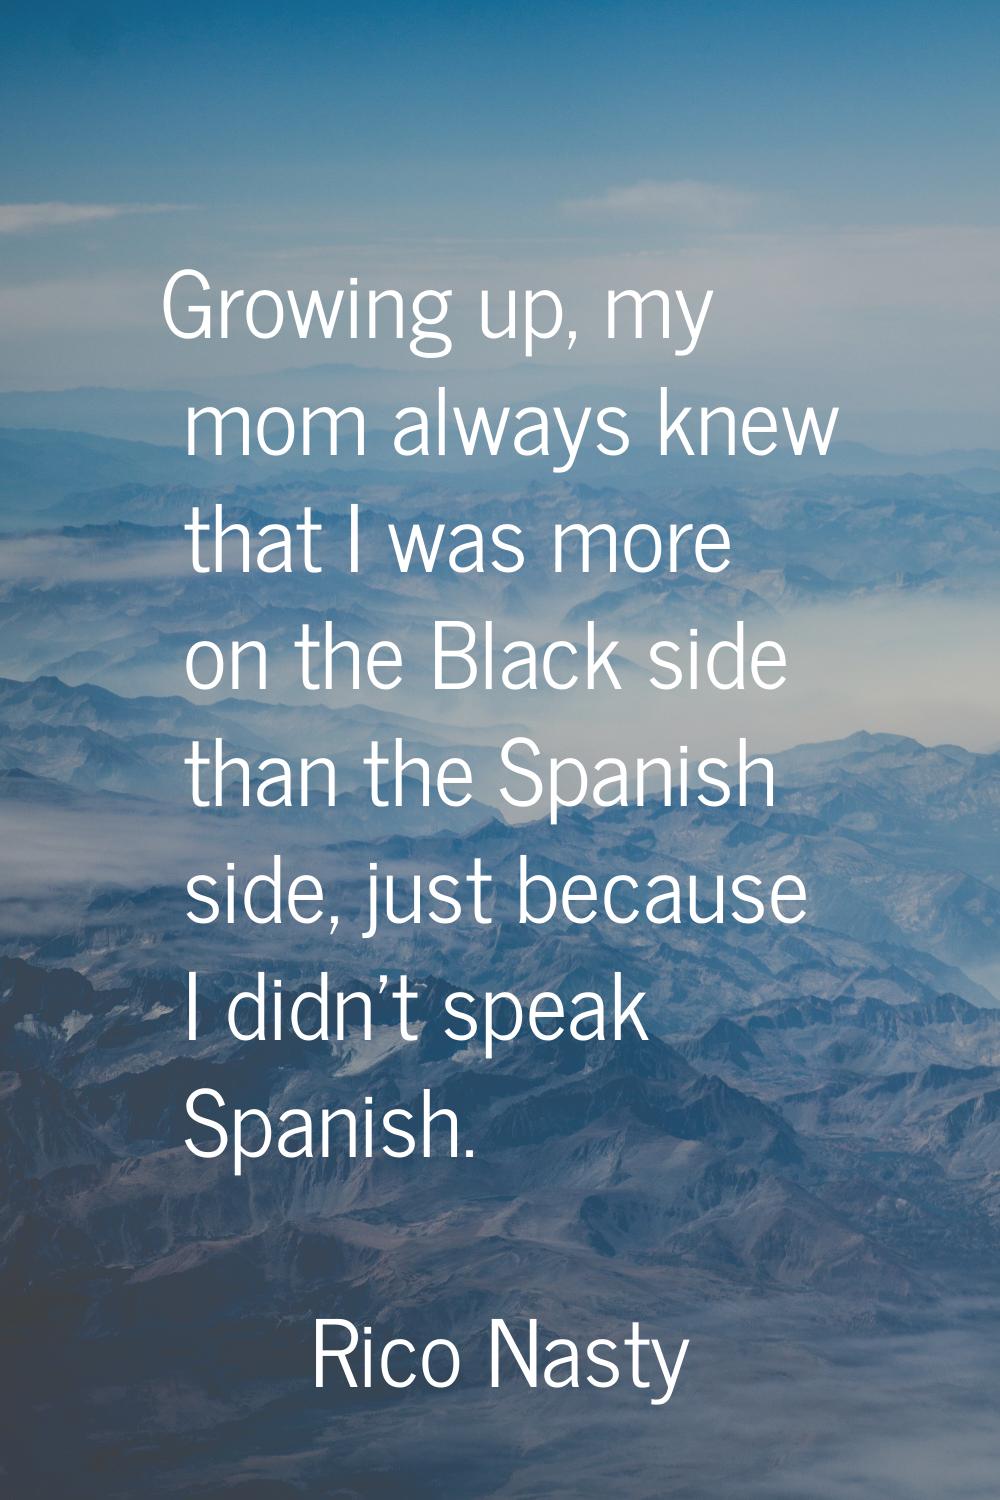 Growing up, my mom always knew that I was more on the Black side than the Spanish side, just becaus